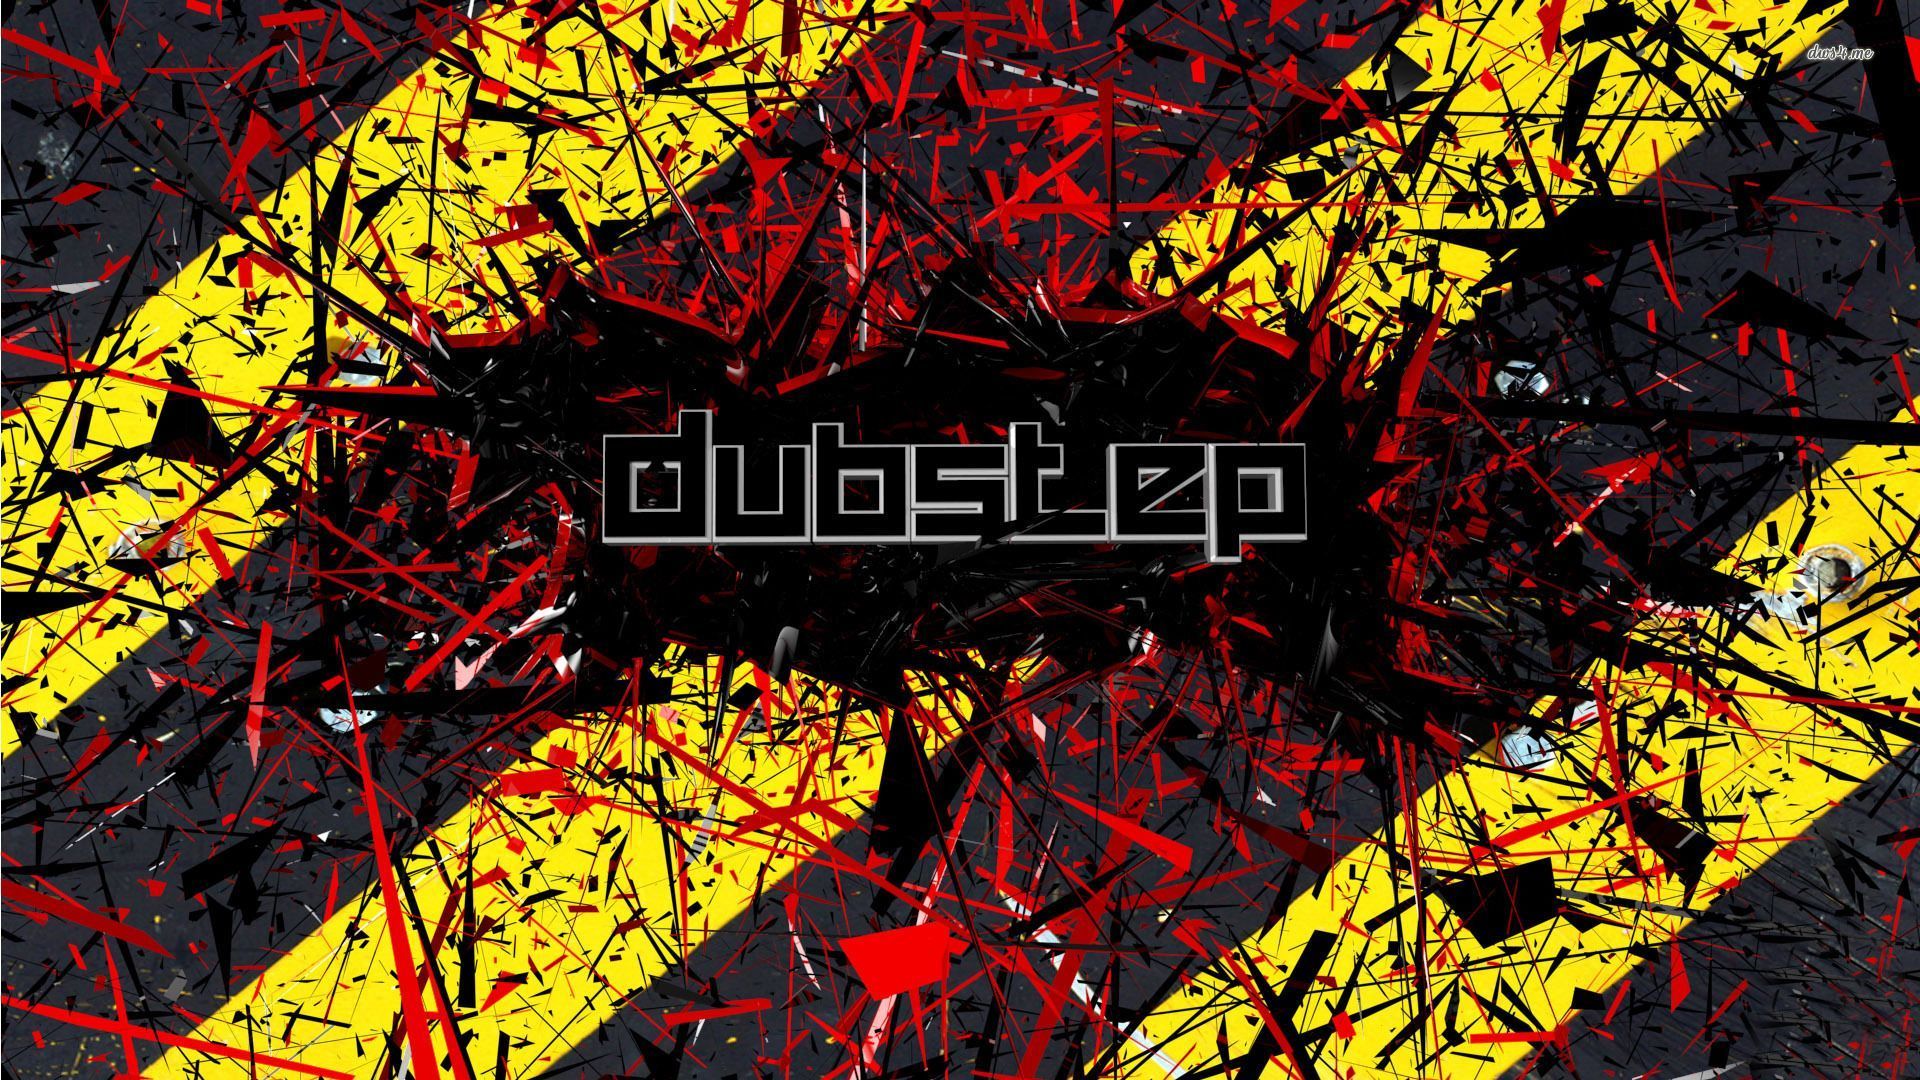 Download Dubstep Wallpaper Wide Awesome #8m42hy3j07 - Download ...